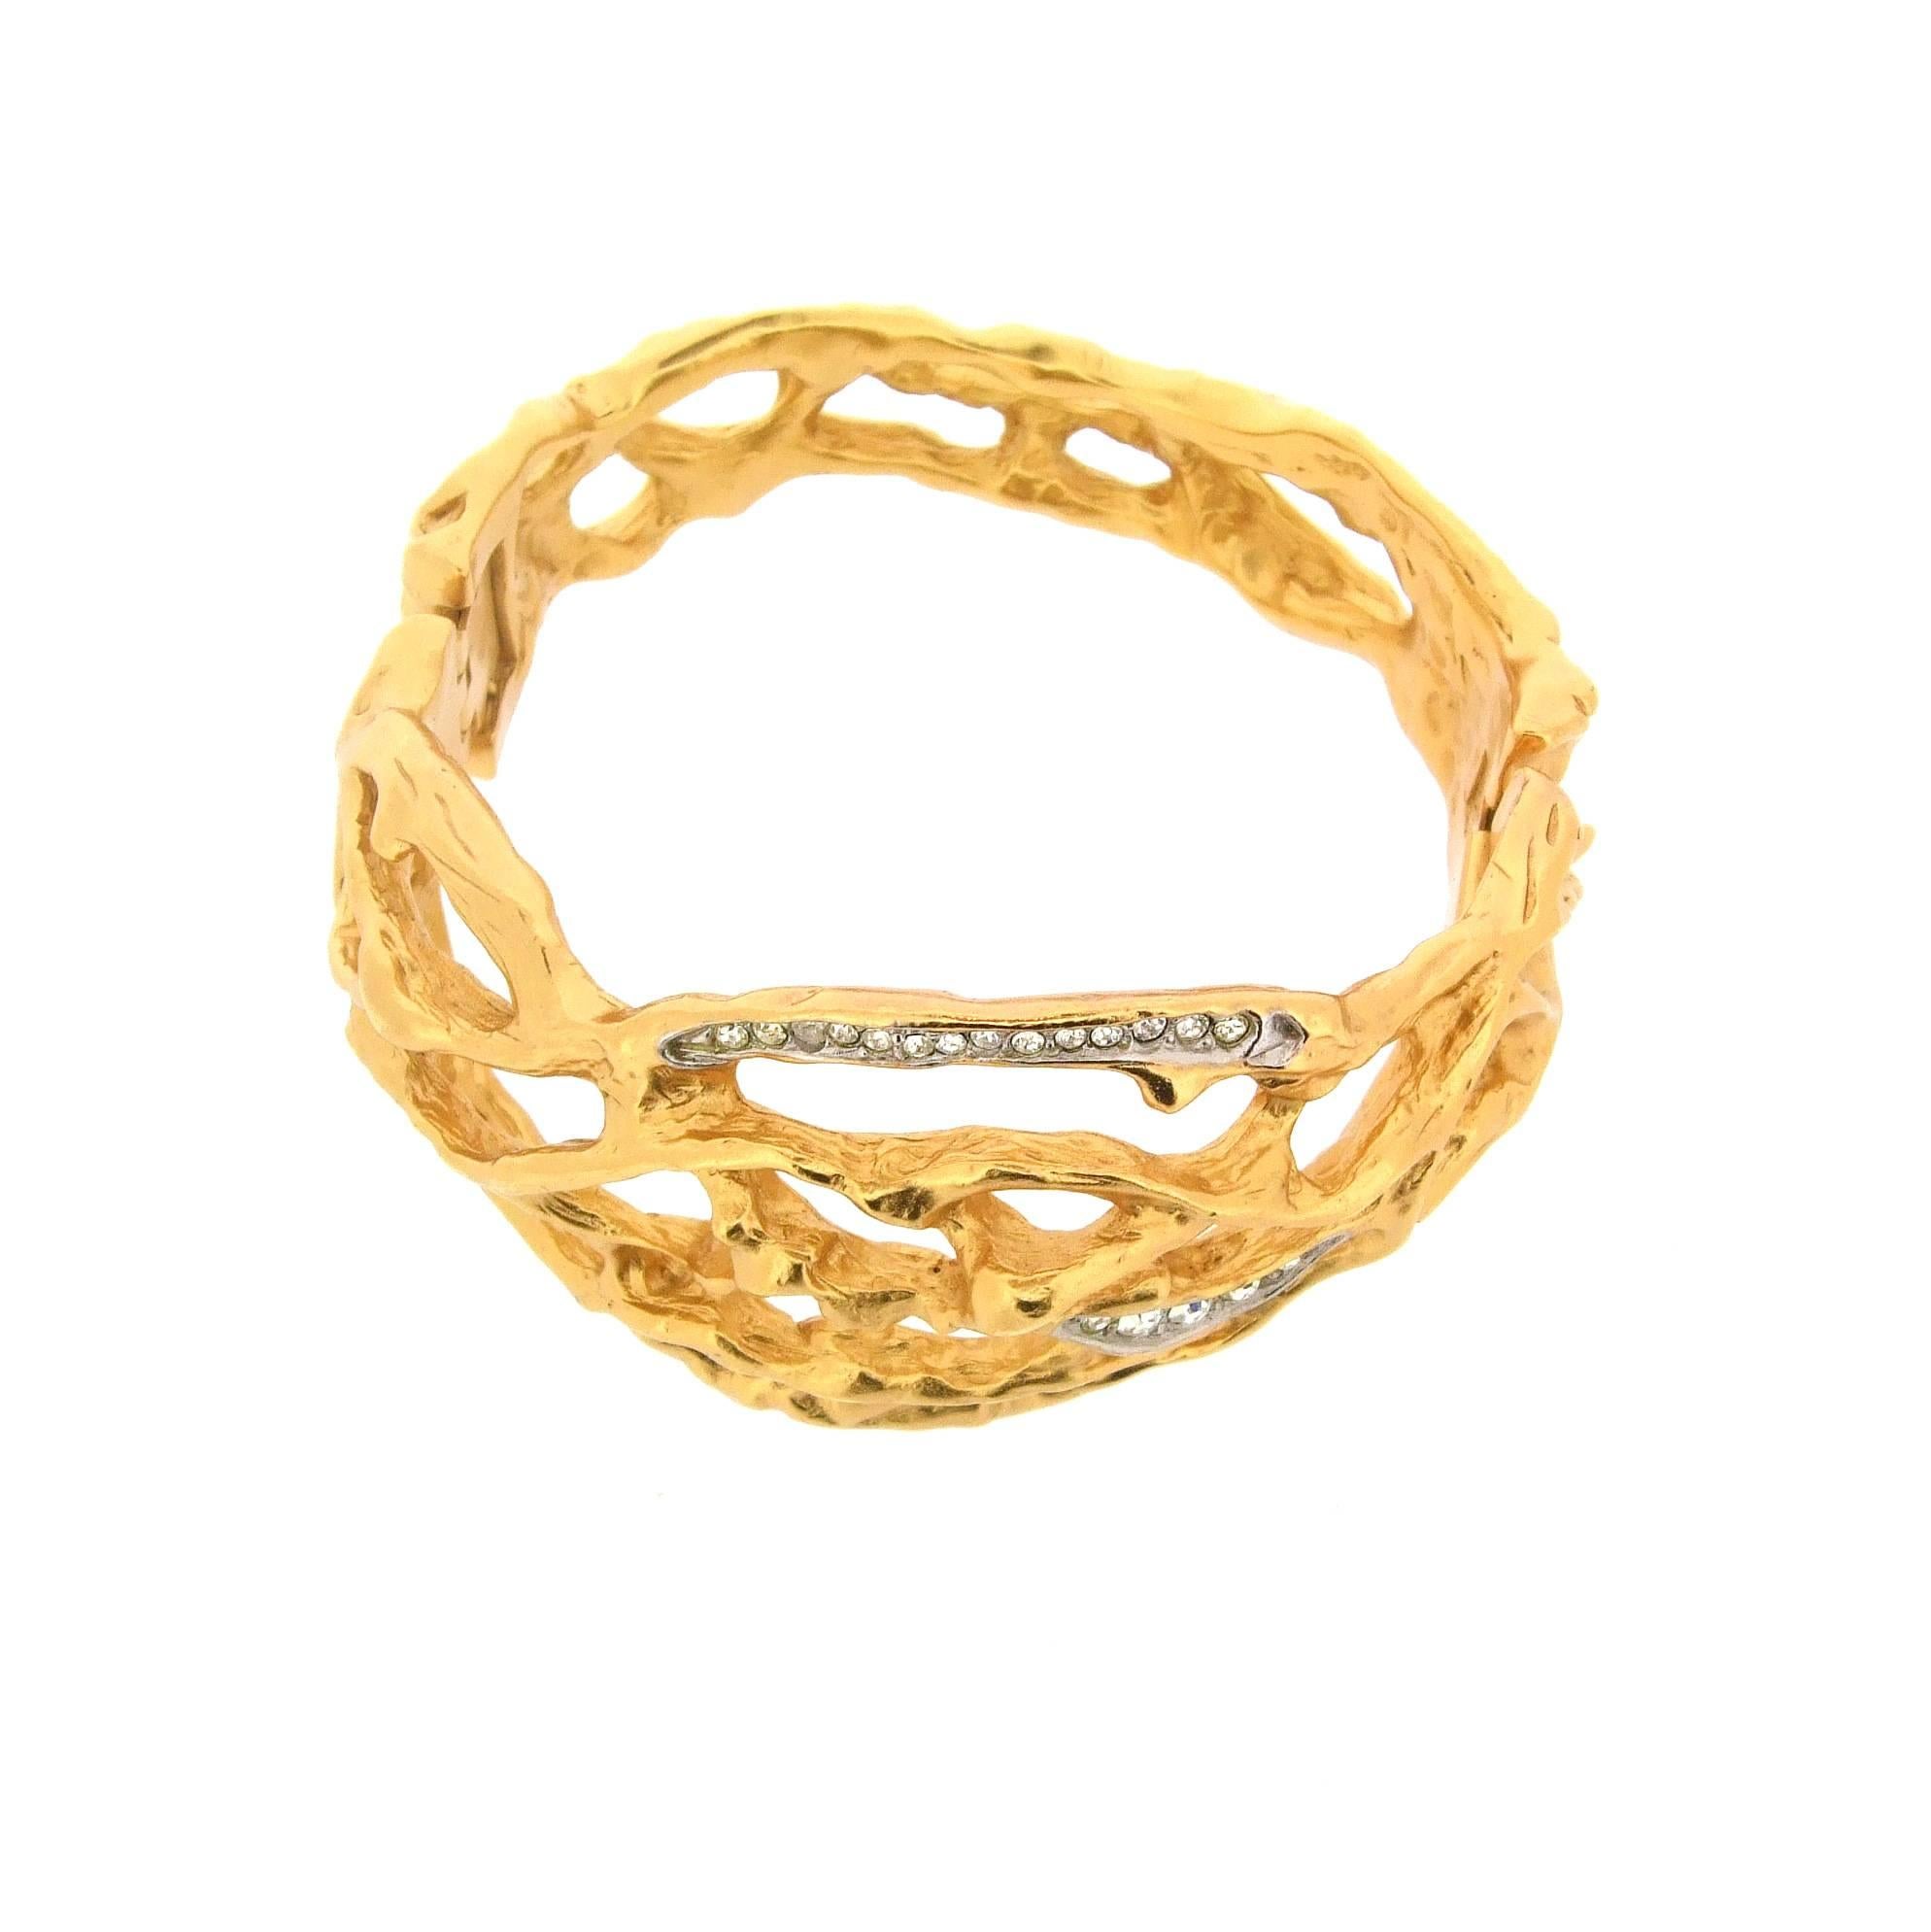 1990s Elizabeth Taylor for Avon Twisted Vine Bracelet In Excellent Condition For Sale In London, GB